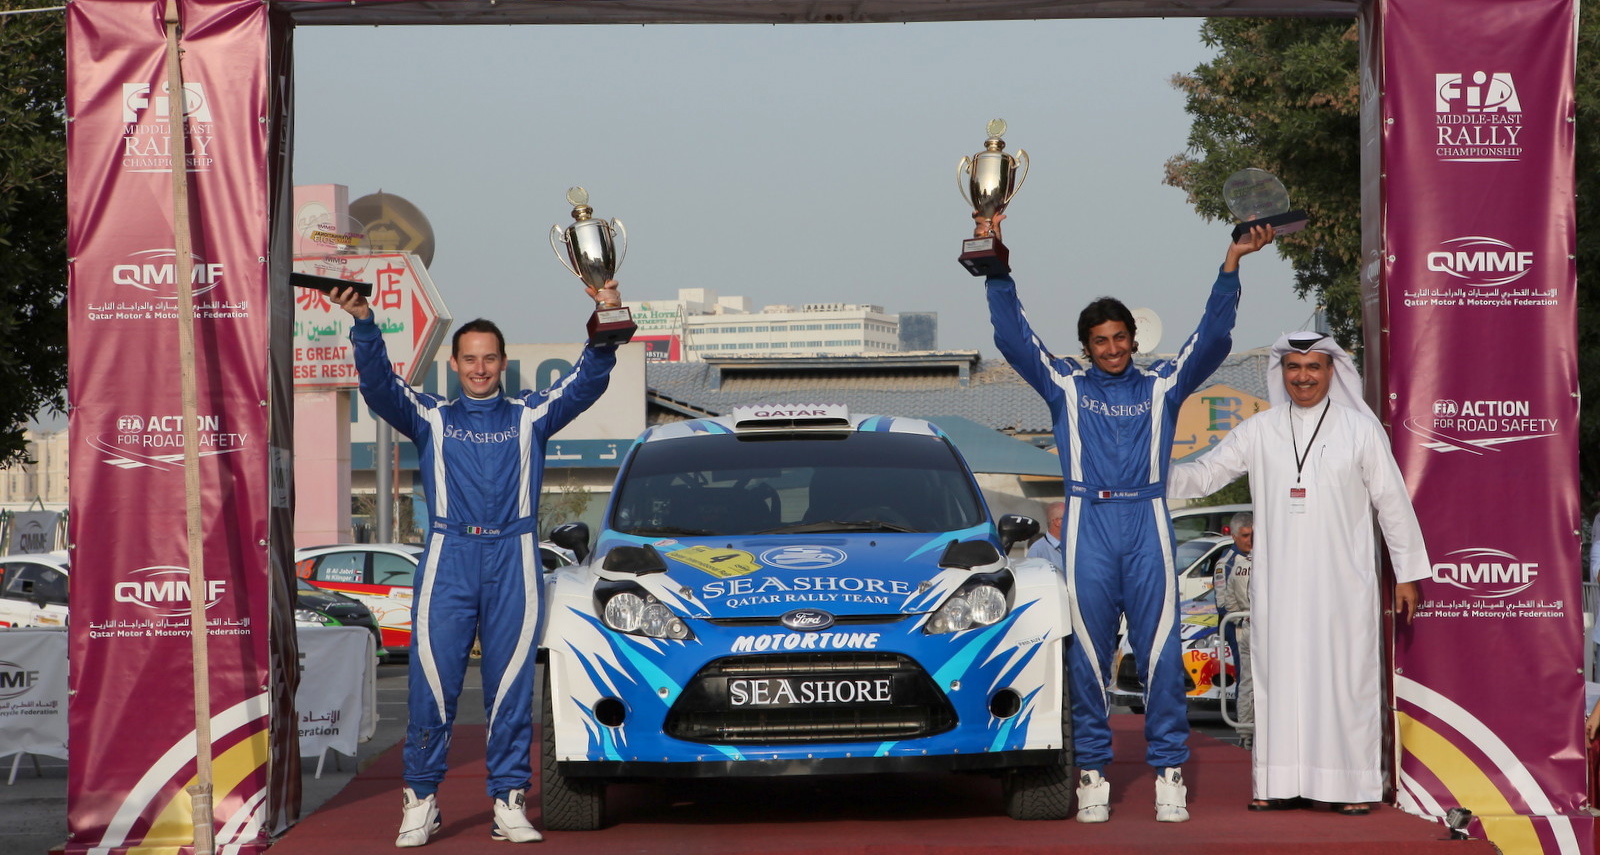 Middle East Rally Championship Alchetron, the free social encyclopedia